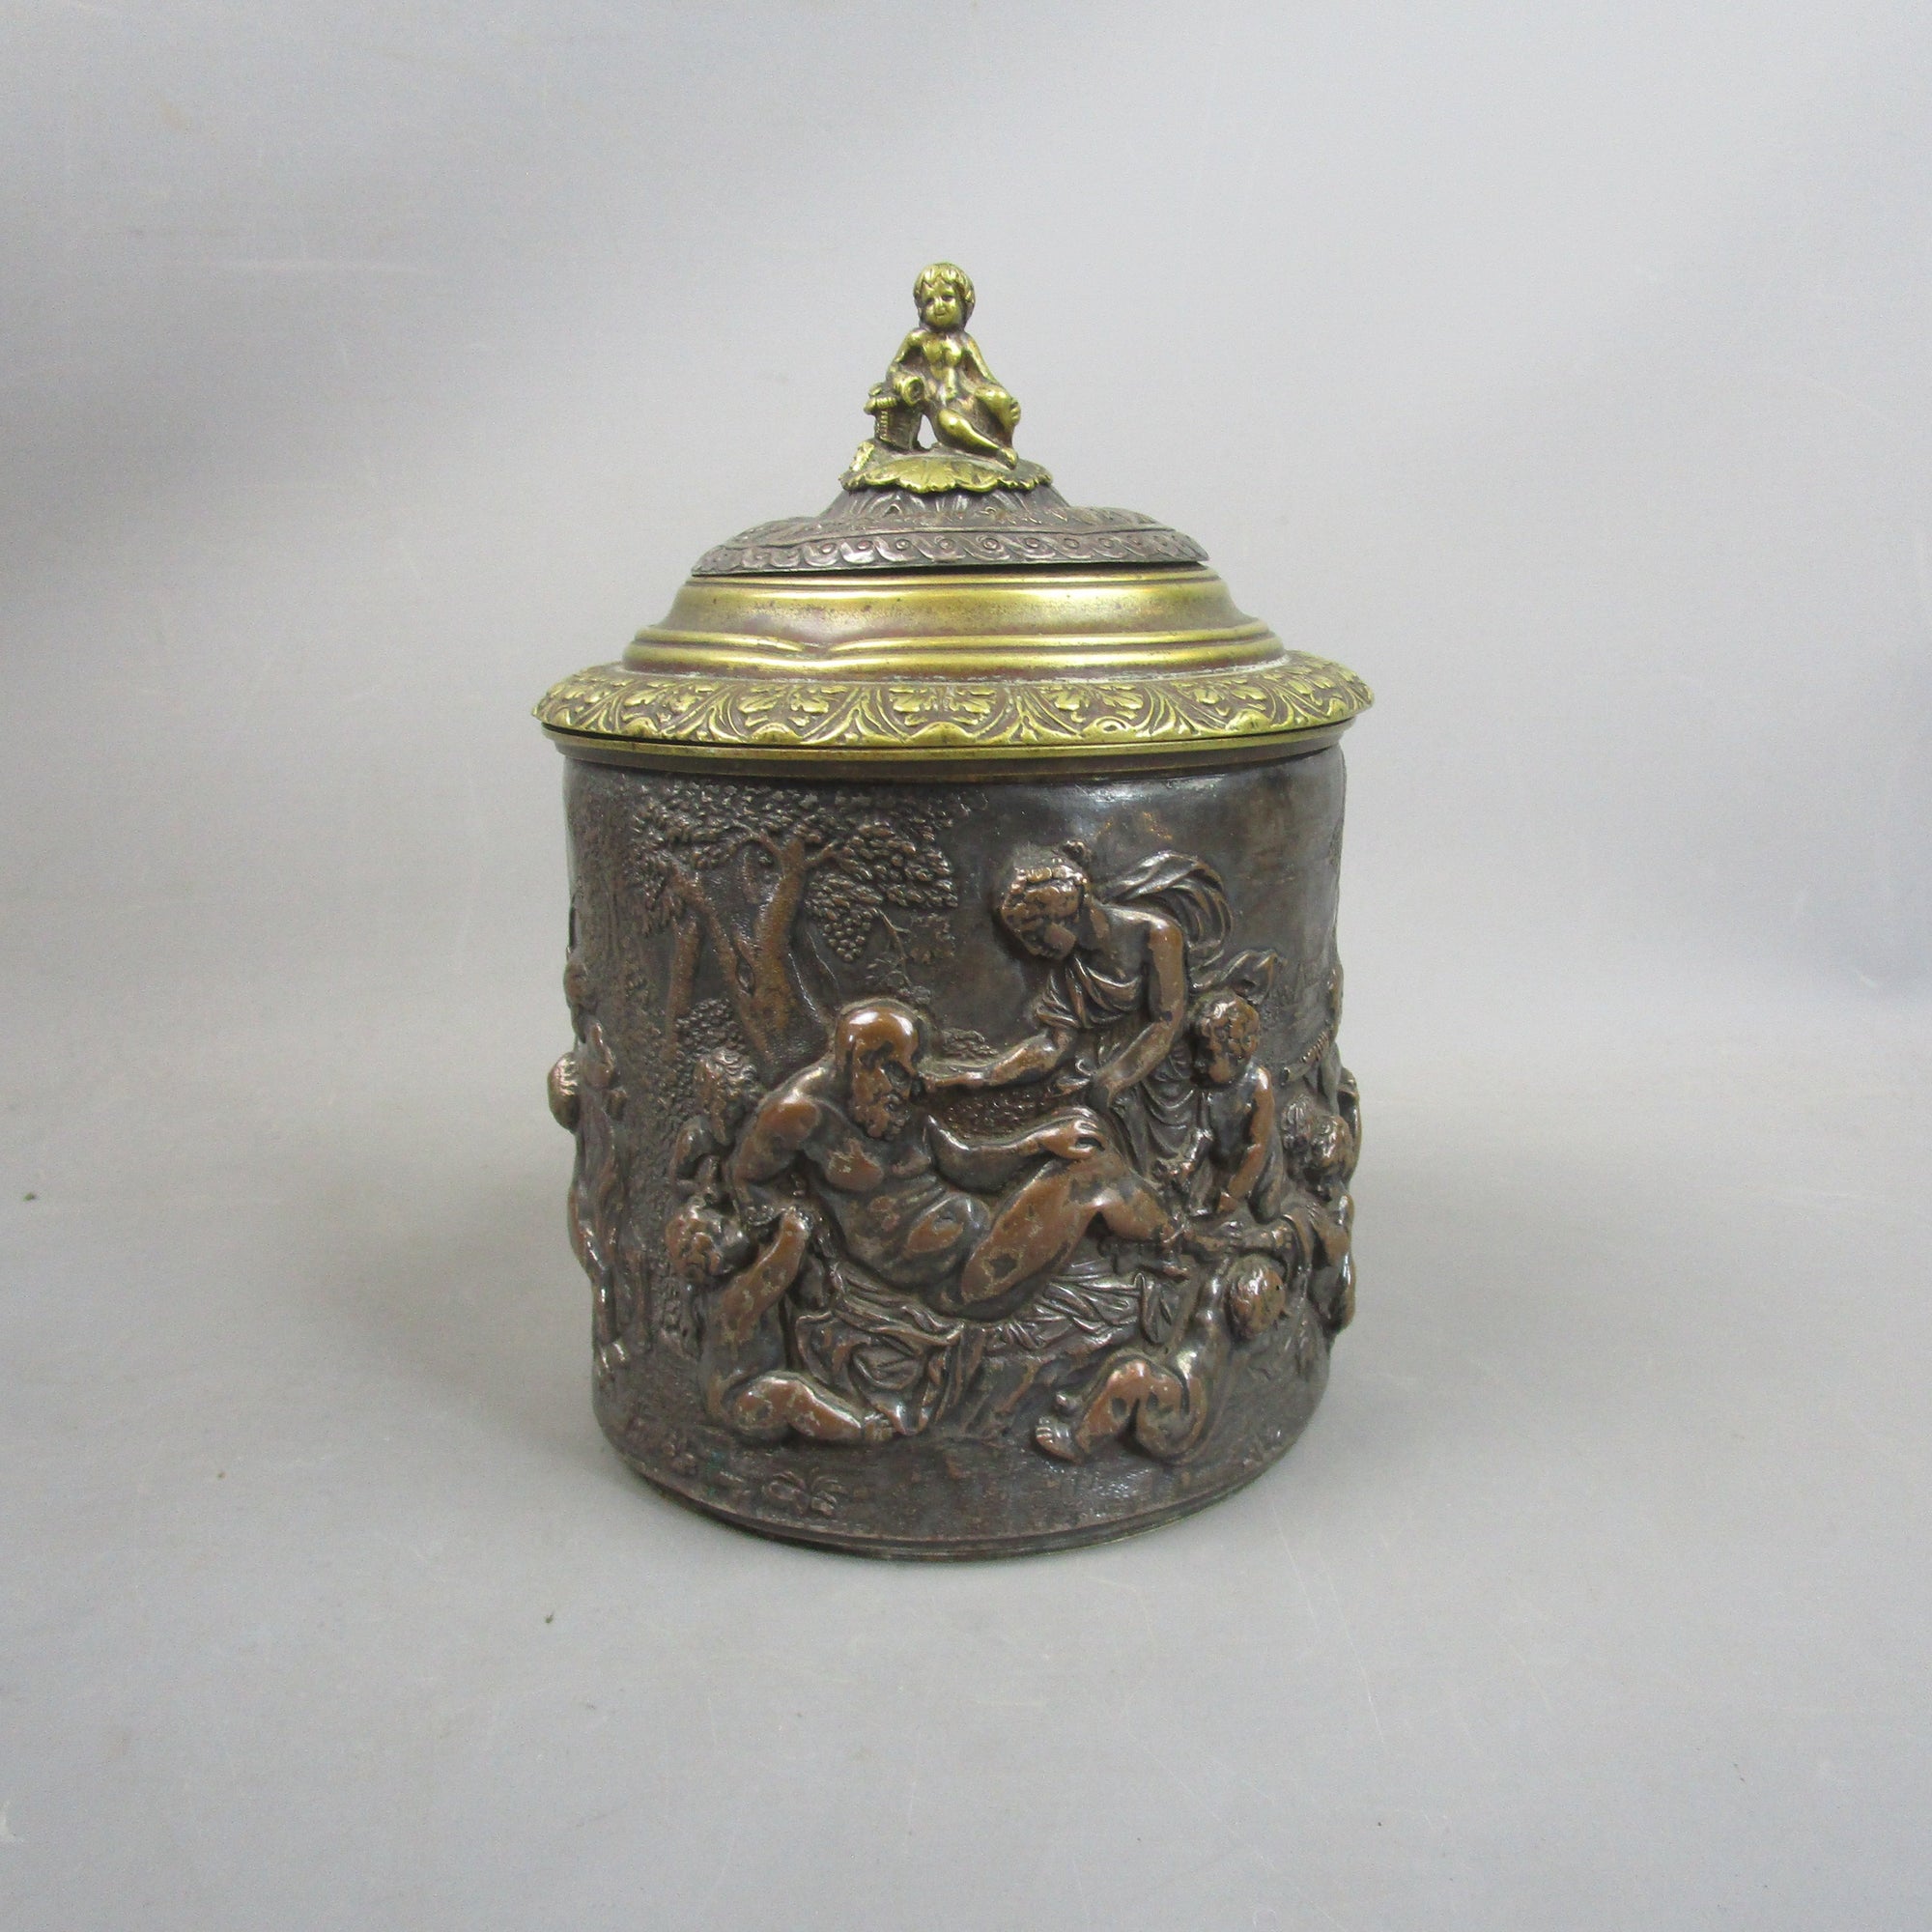 Copper & Brass Embossed Tobacco Jar With Mythical Scene Antique Victorian c1880